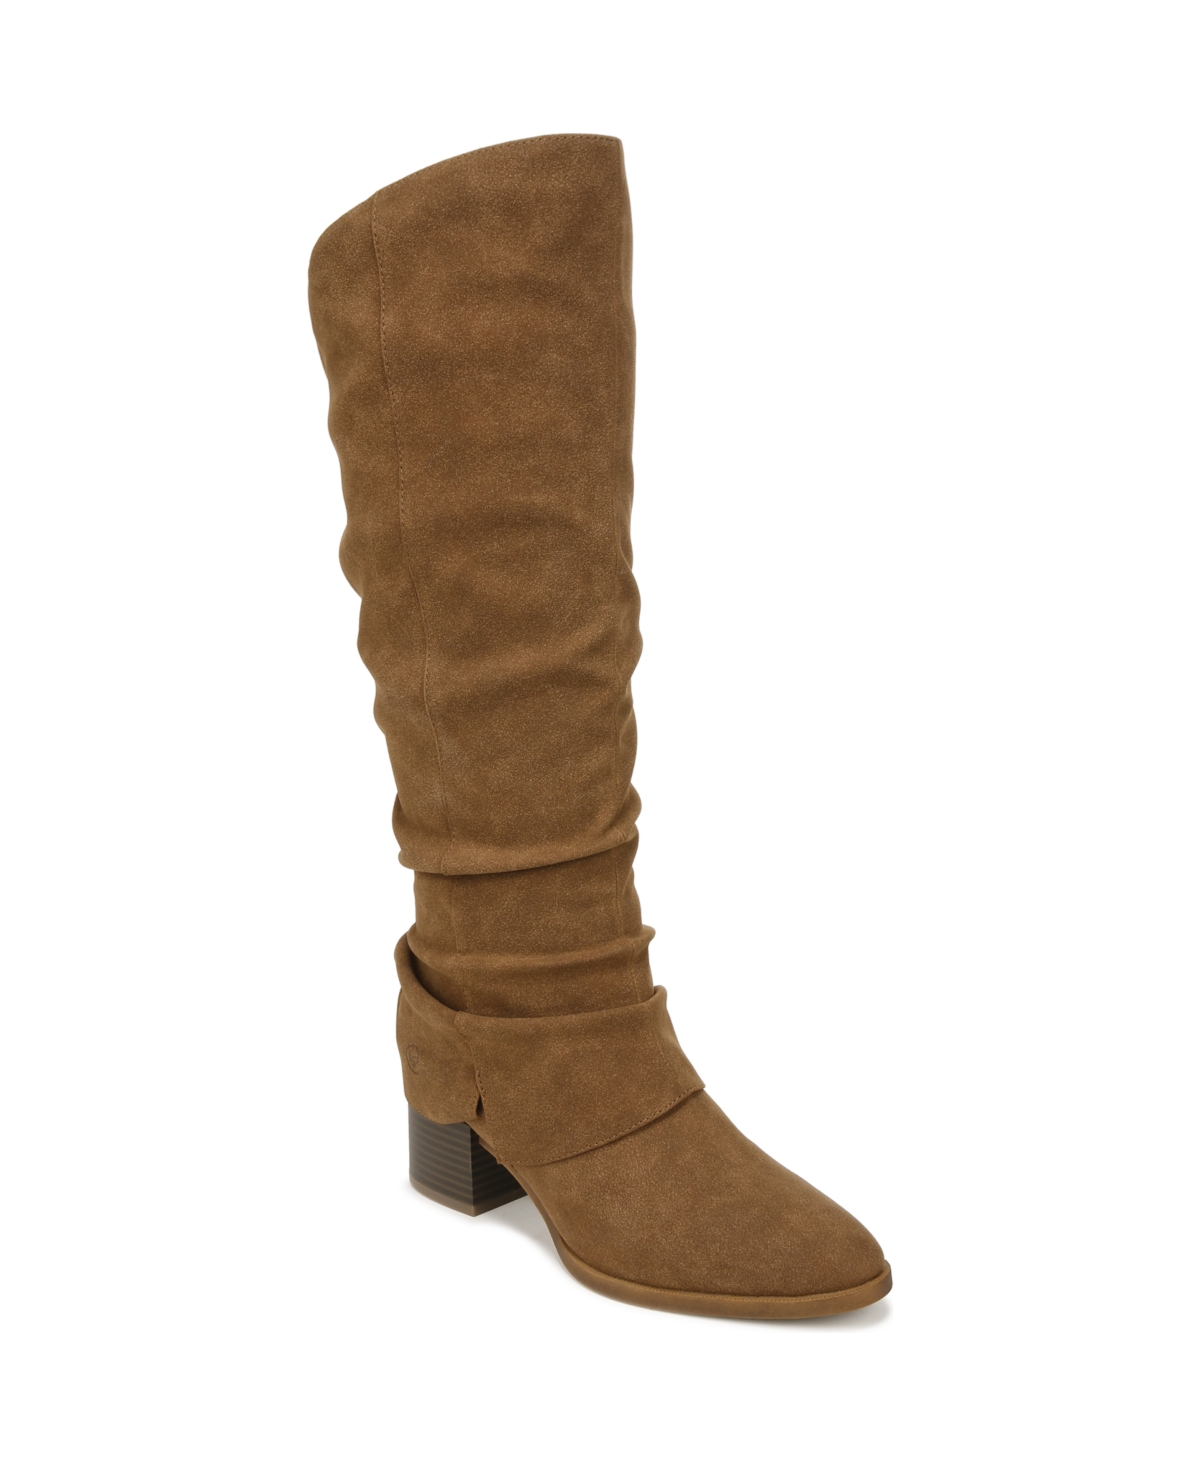 Delilah Knee High Boots - Beige Faux Leather